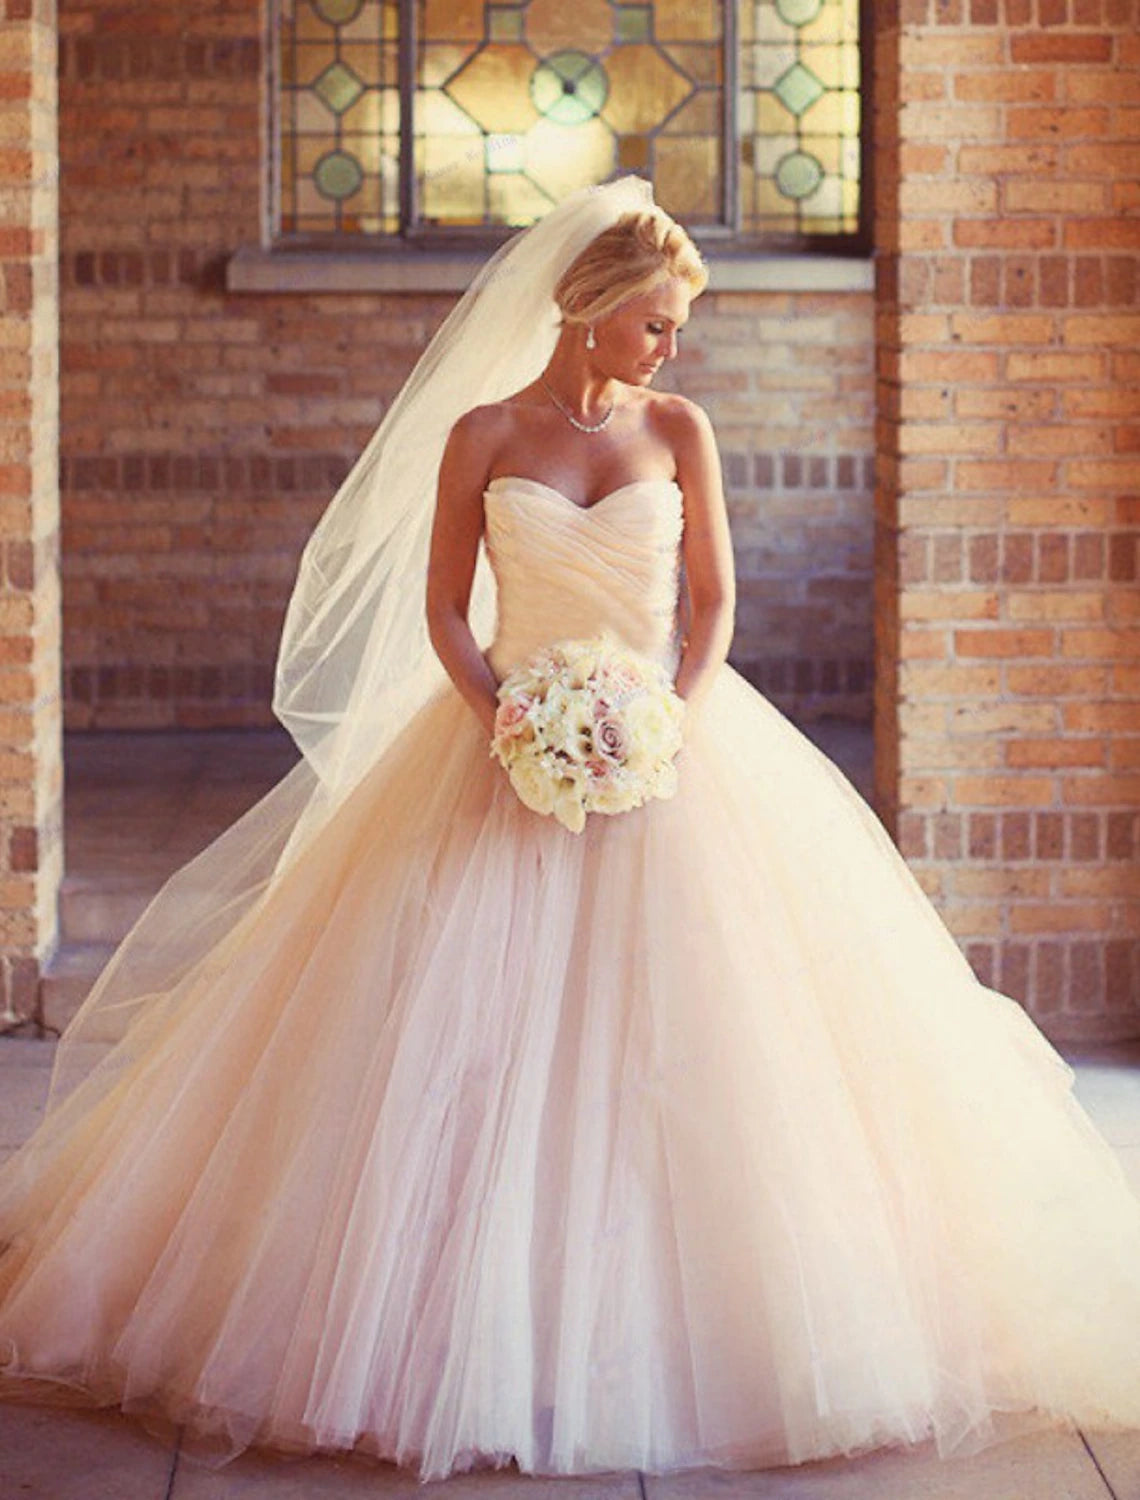 Engagement Formal Wedding Dresses Ball Gown Sweetheart Strapless Court Train Tulle Bridal Gowns With Ruched